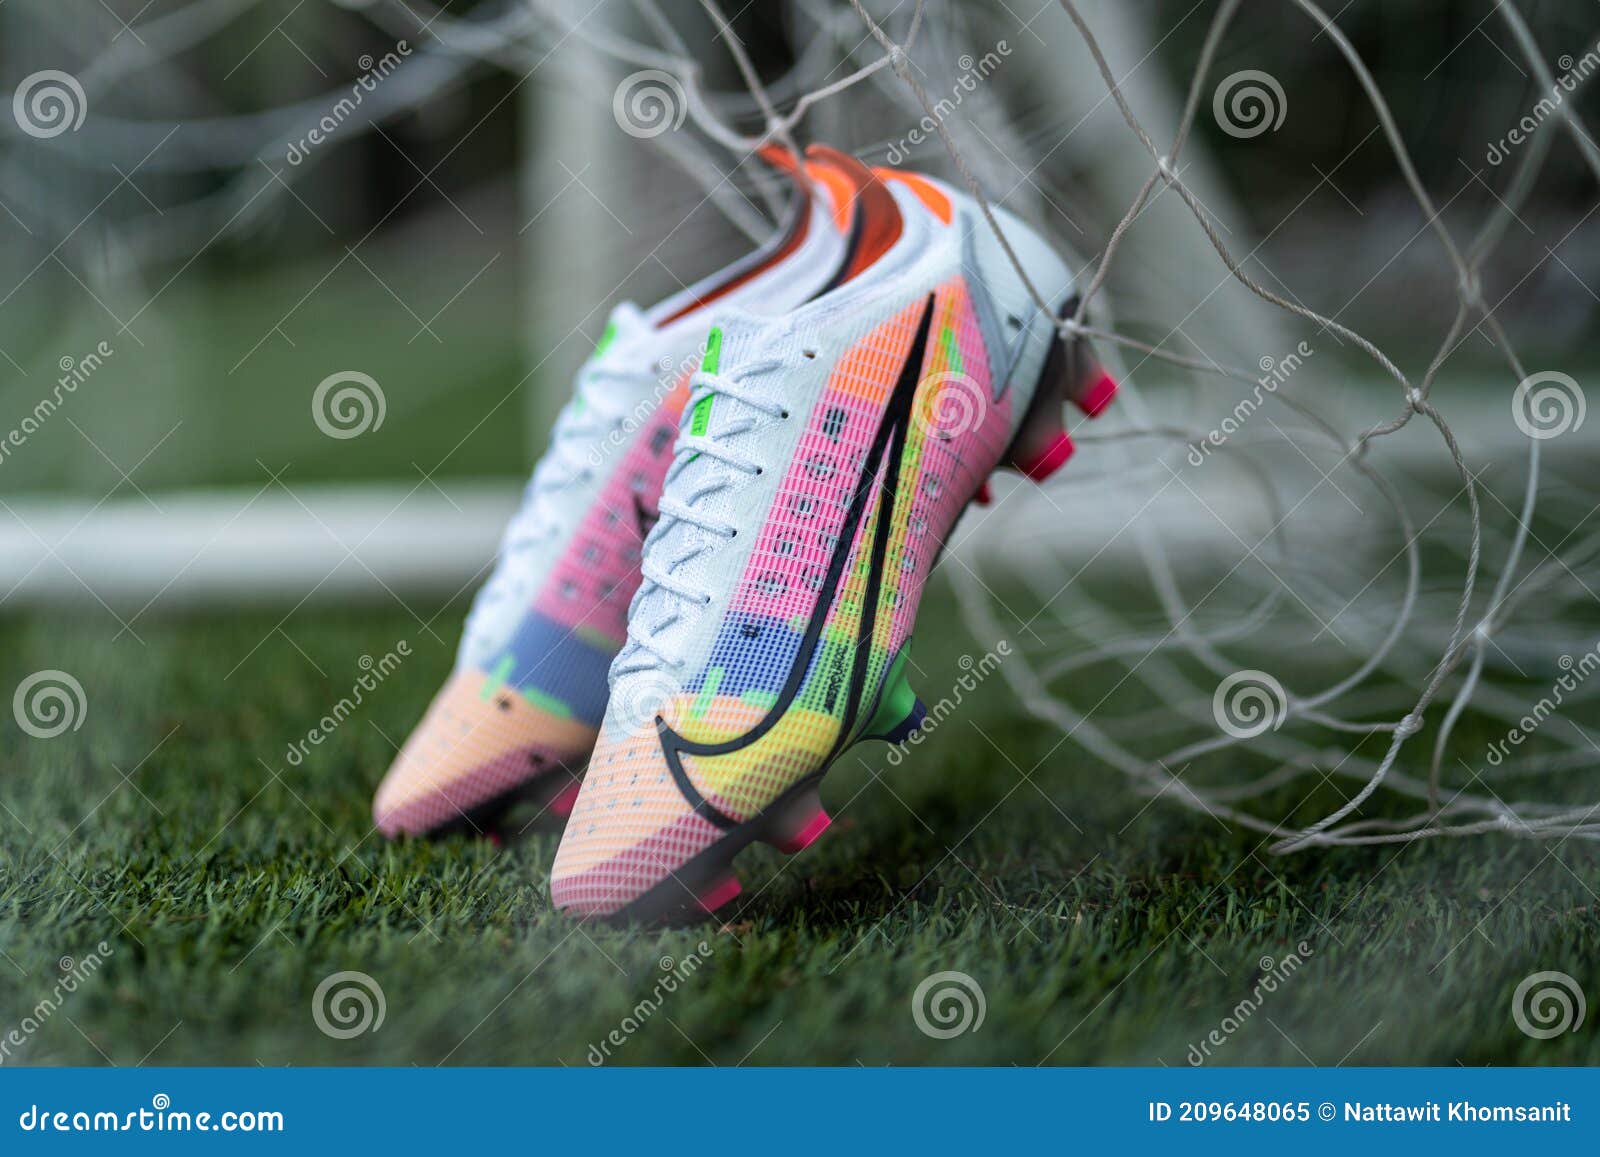 Seaboard Framework Still Nike Football Boots Photos - Free & Royalty-Free Stock Photos from  Dreamstime